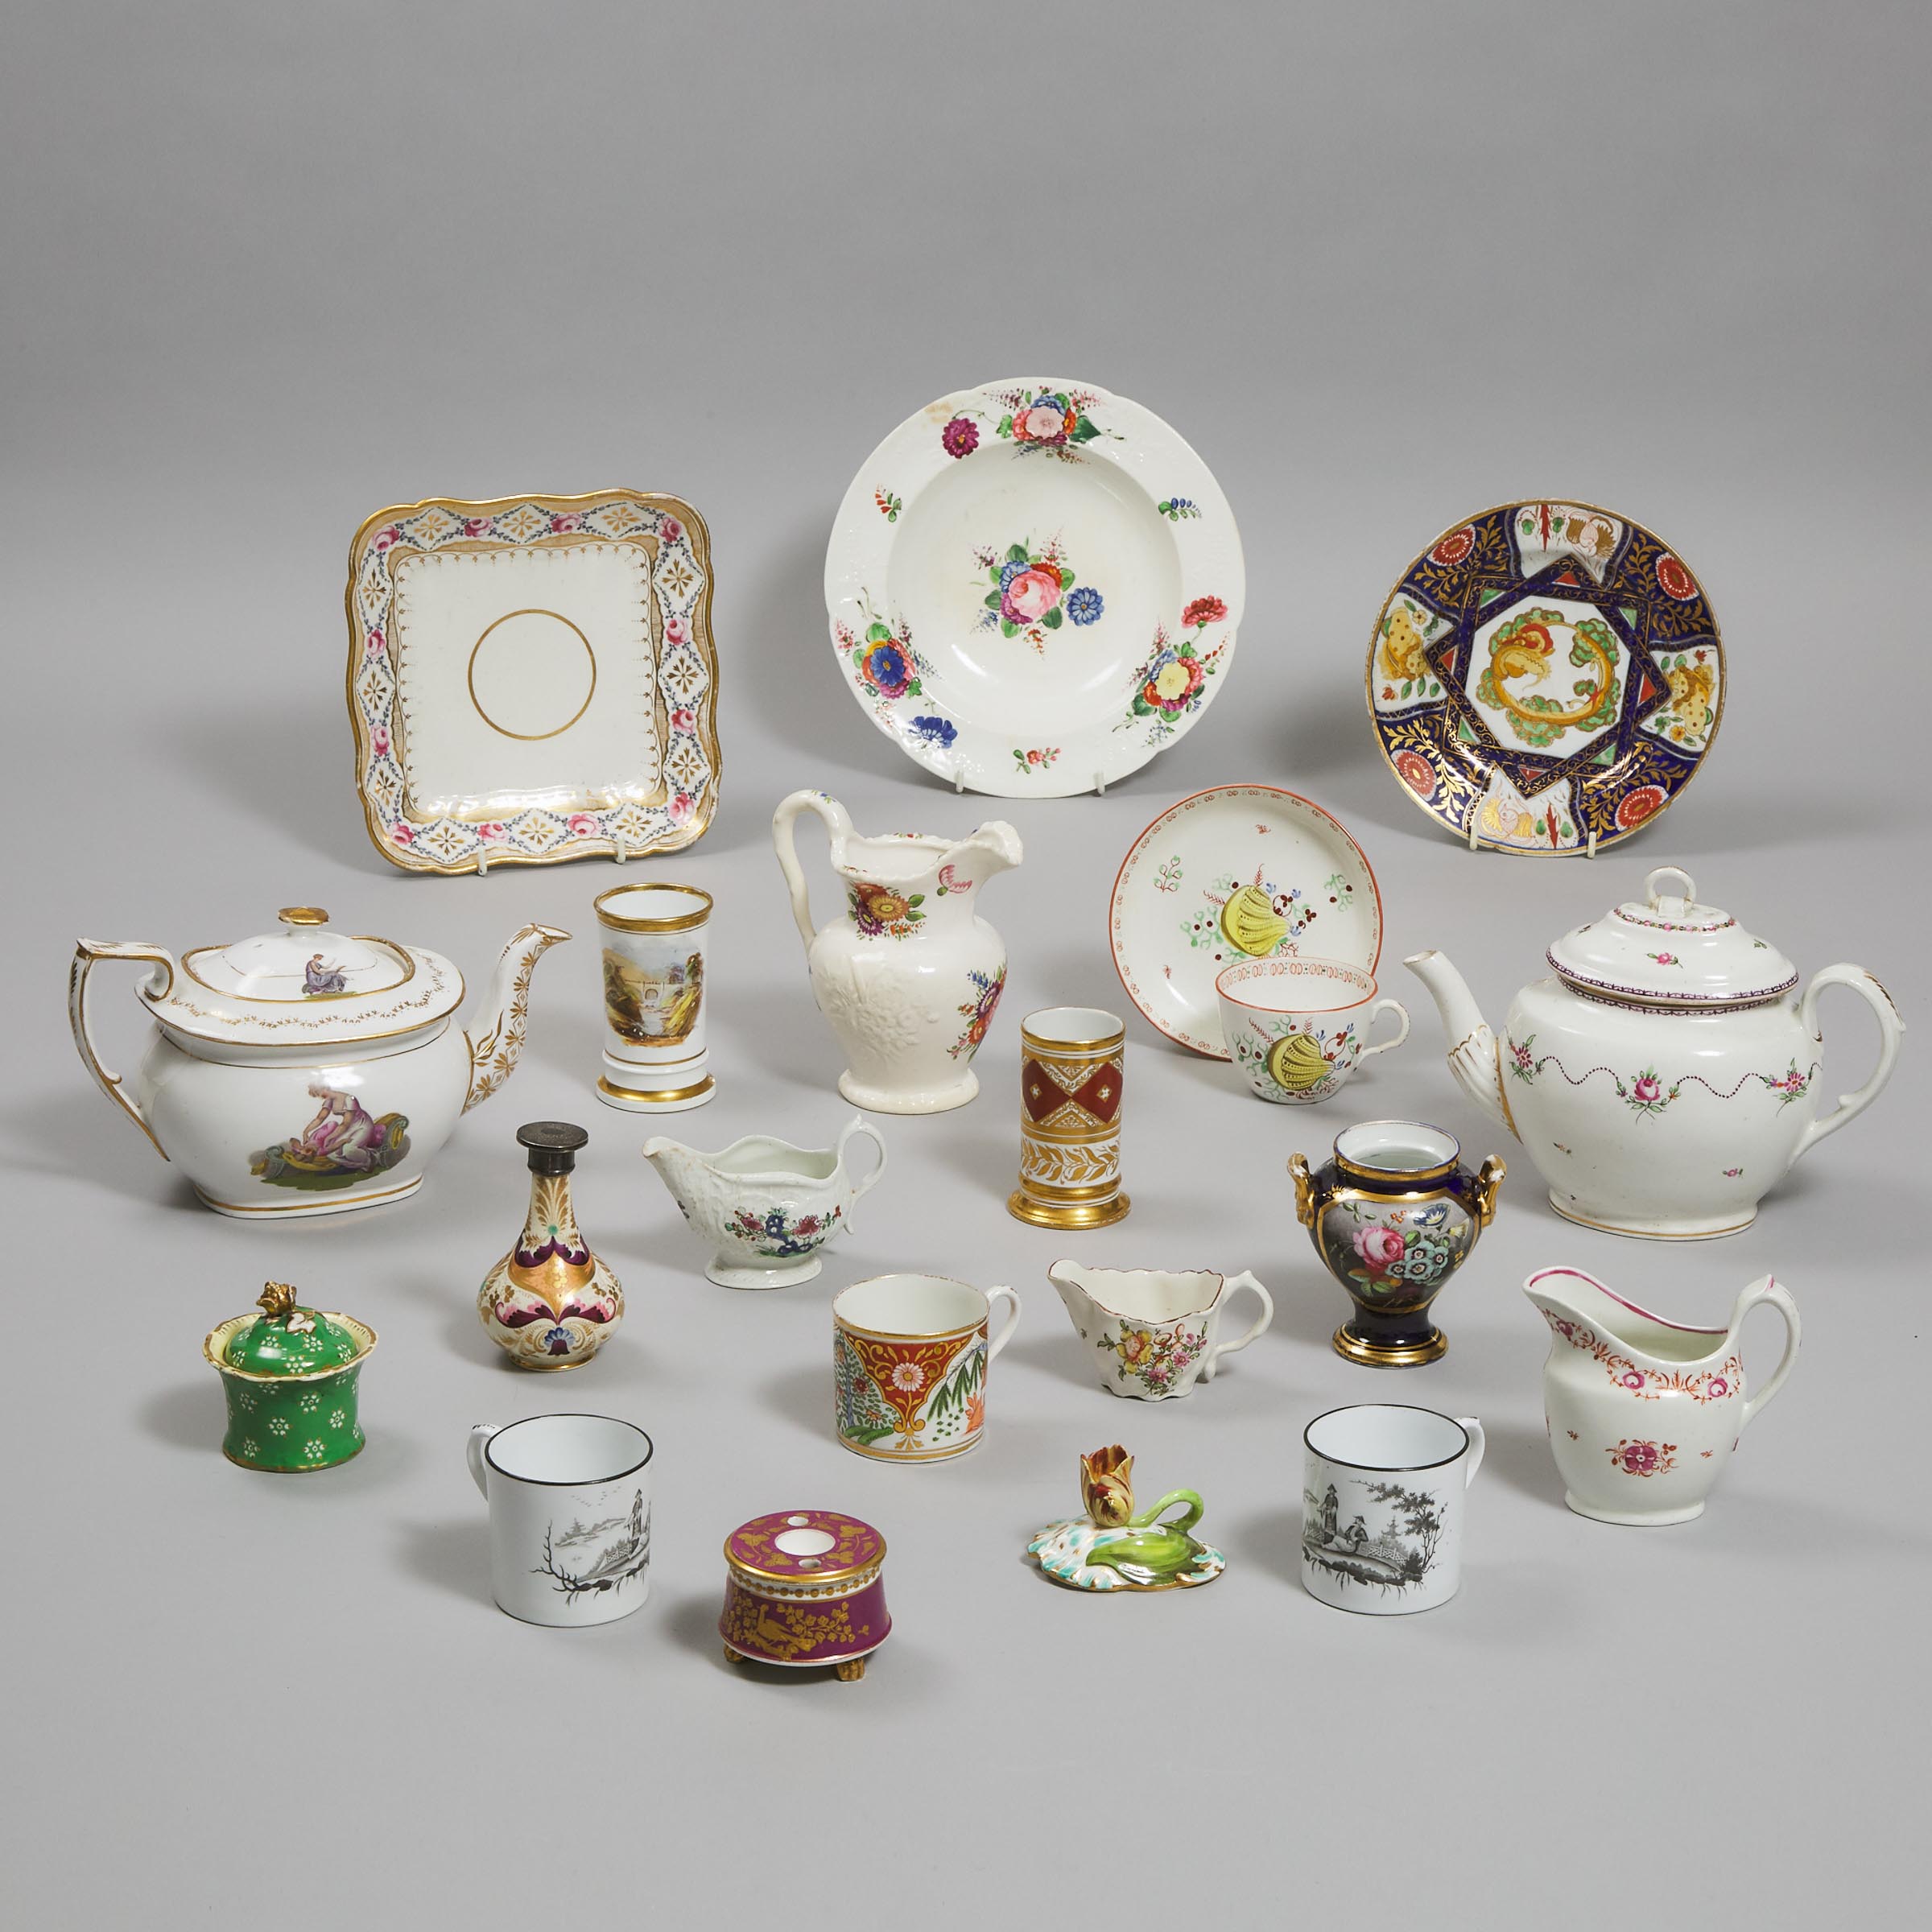 Group of English Porcelain, 18th/19th century